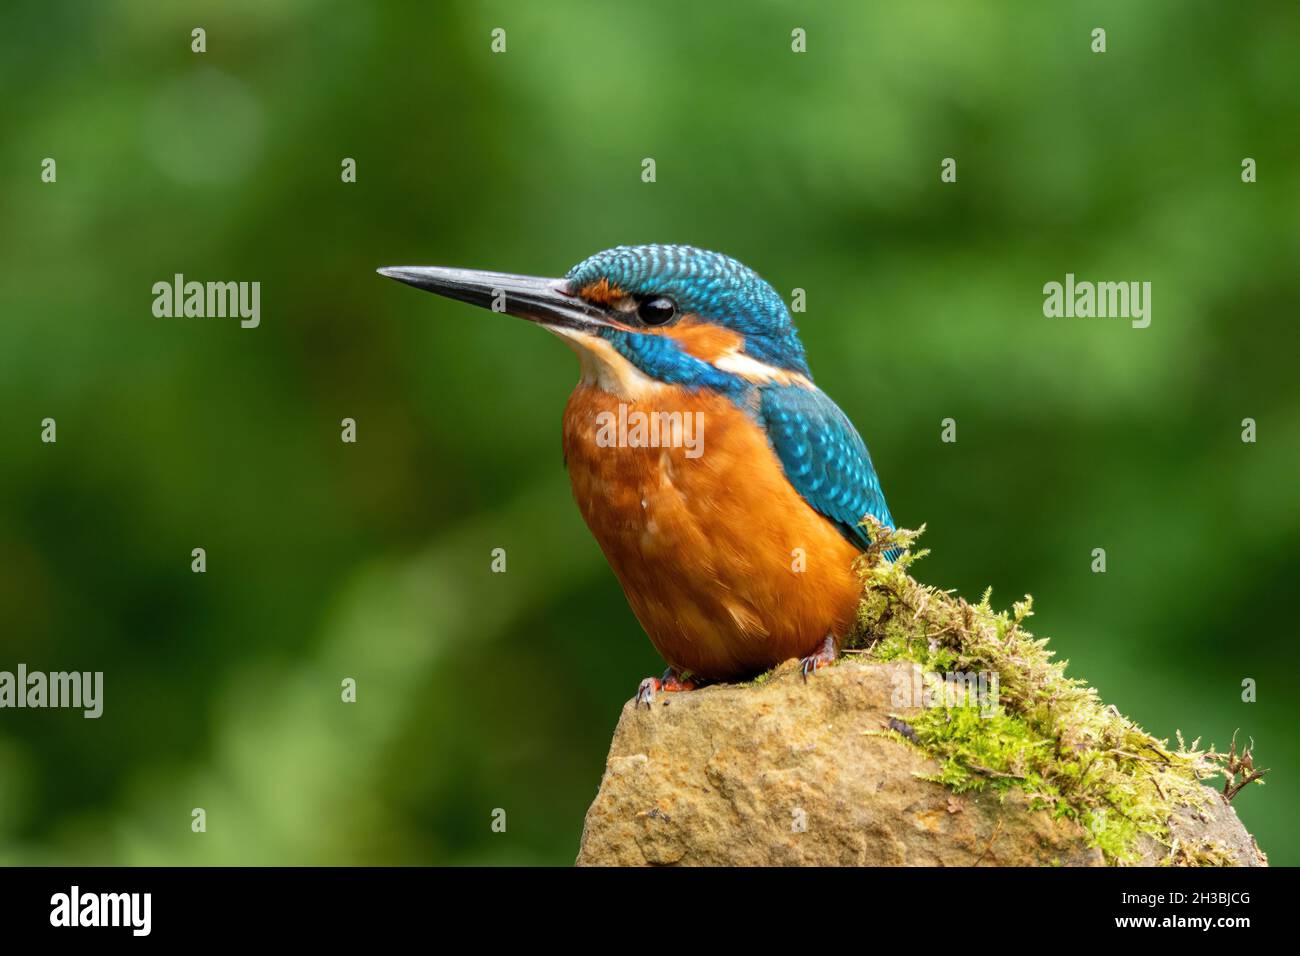 Kingfisher (Alcedo atthis), a colourful british bird on a perch, UK Stock Photo